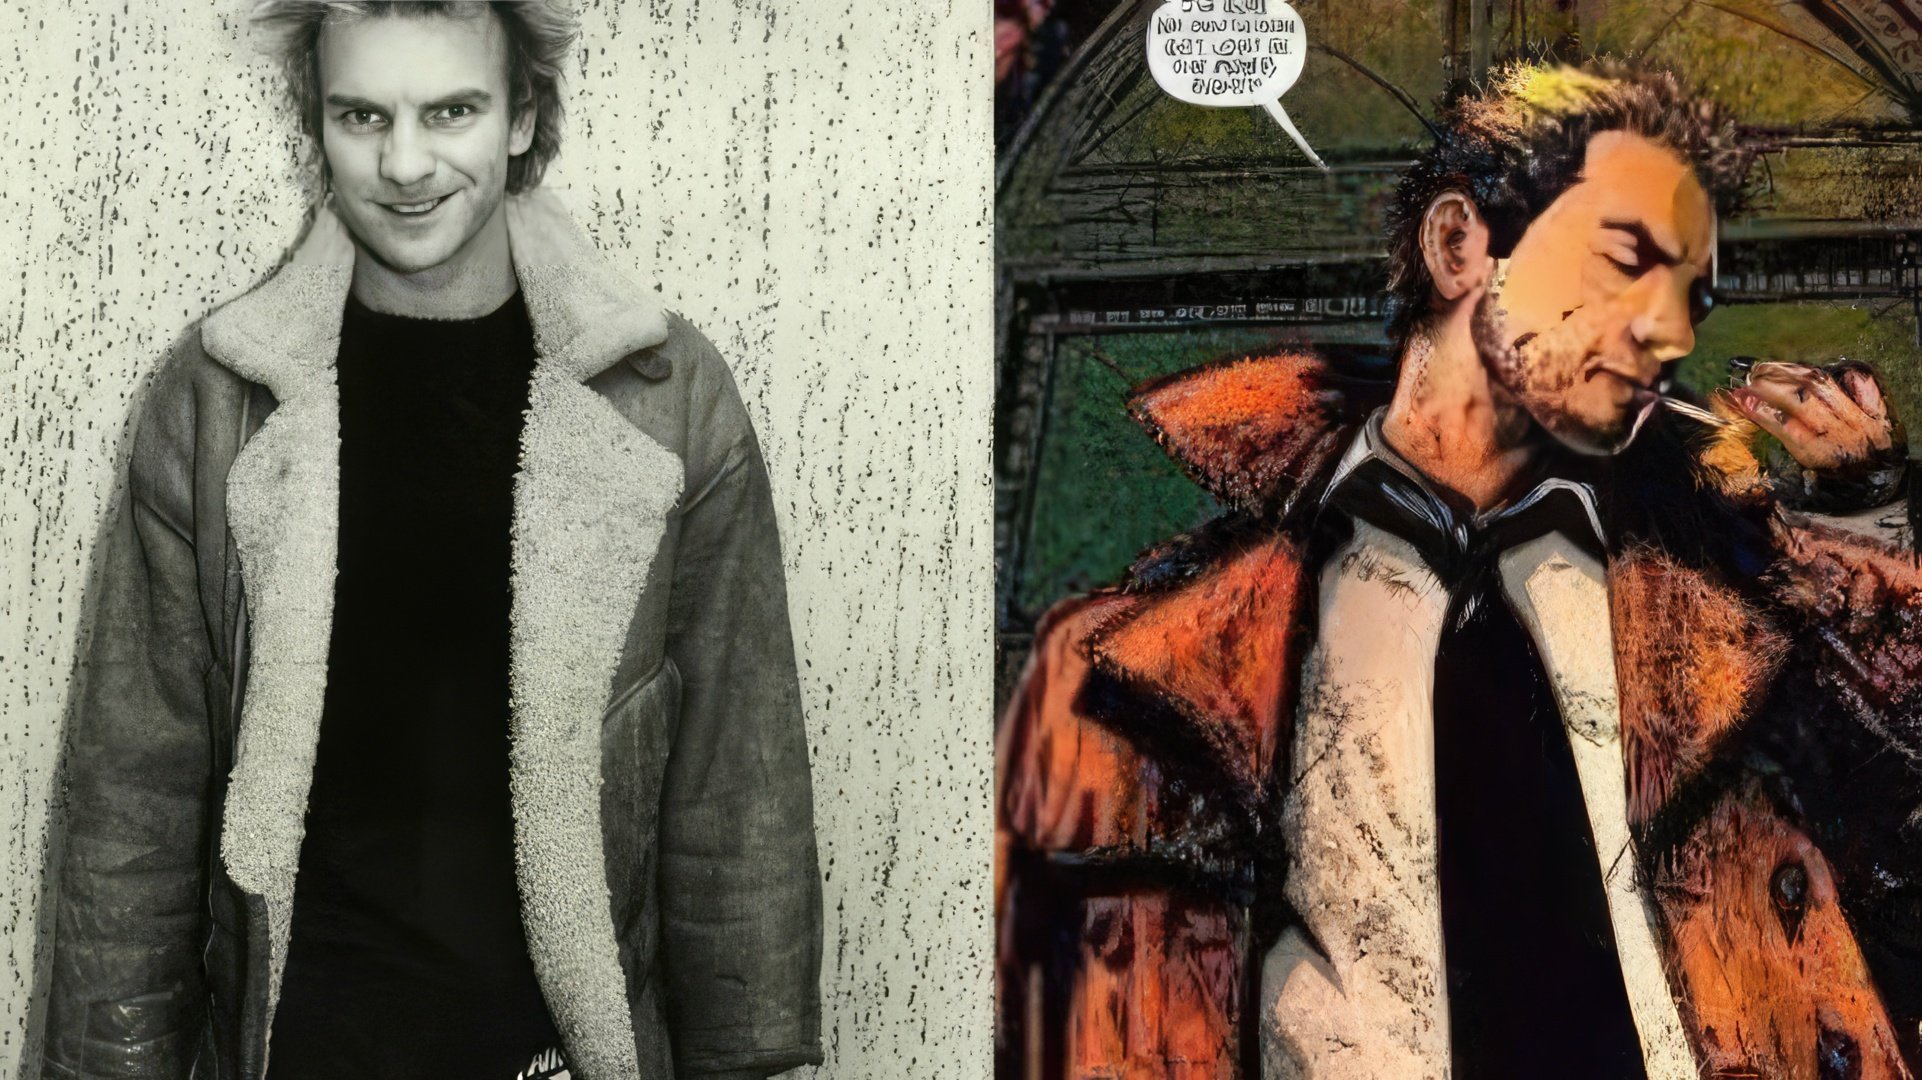 John Constantine is modeled after Sting